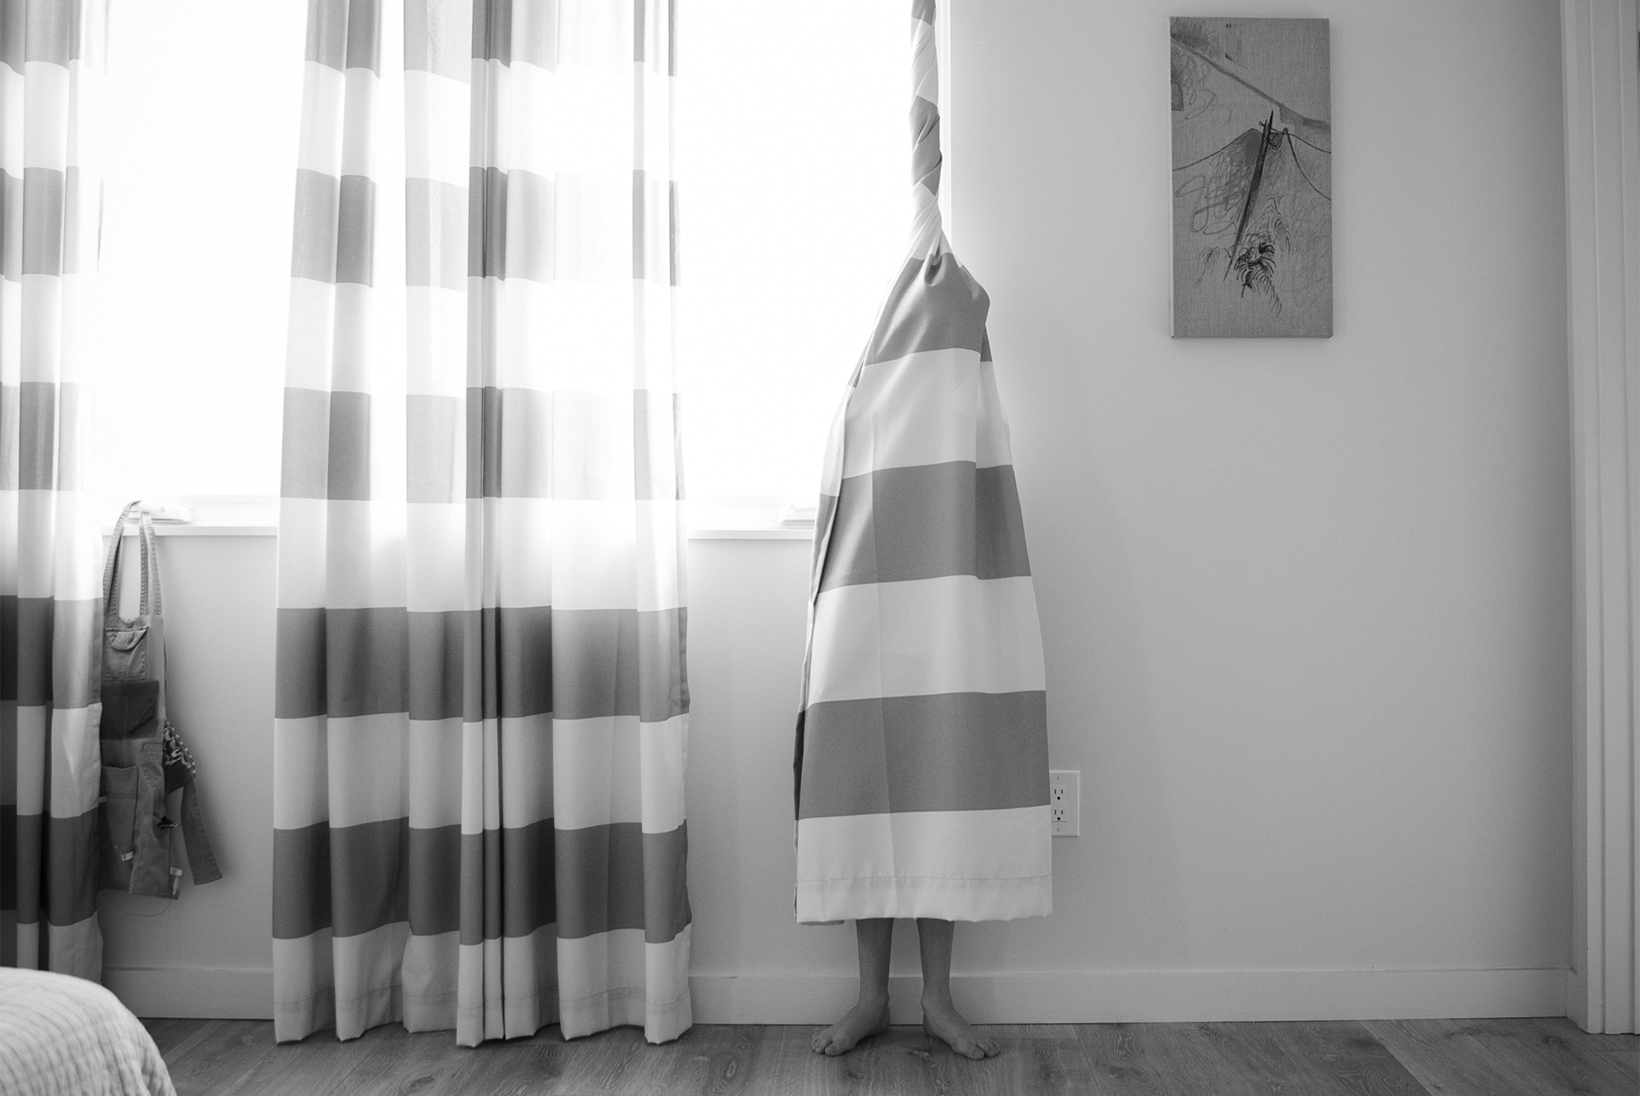 A child is wrapped in the right panel of a curtain with large horizonal stripes. The top of the curtain above the head is tightly wound and then the curtain flares out covering the body ending midcalf so part of the legs and bare feet are visible.